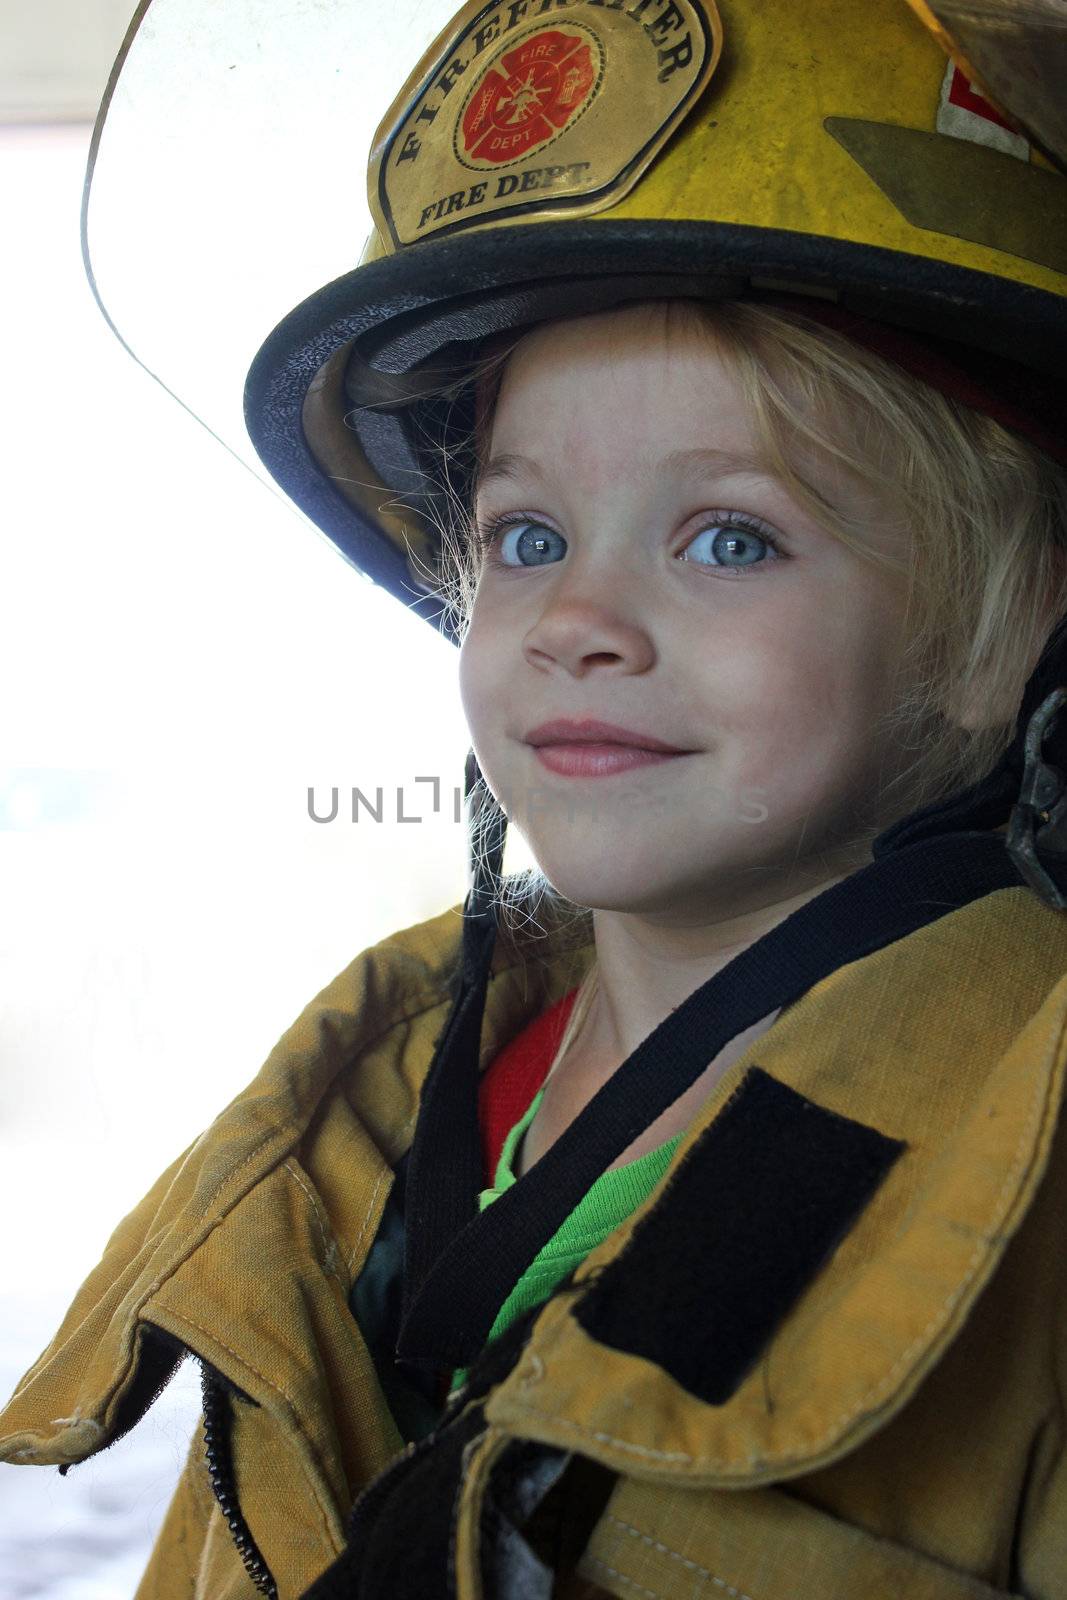 Young girl as firefighter by mahnken